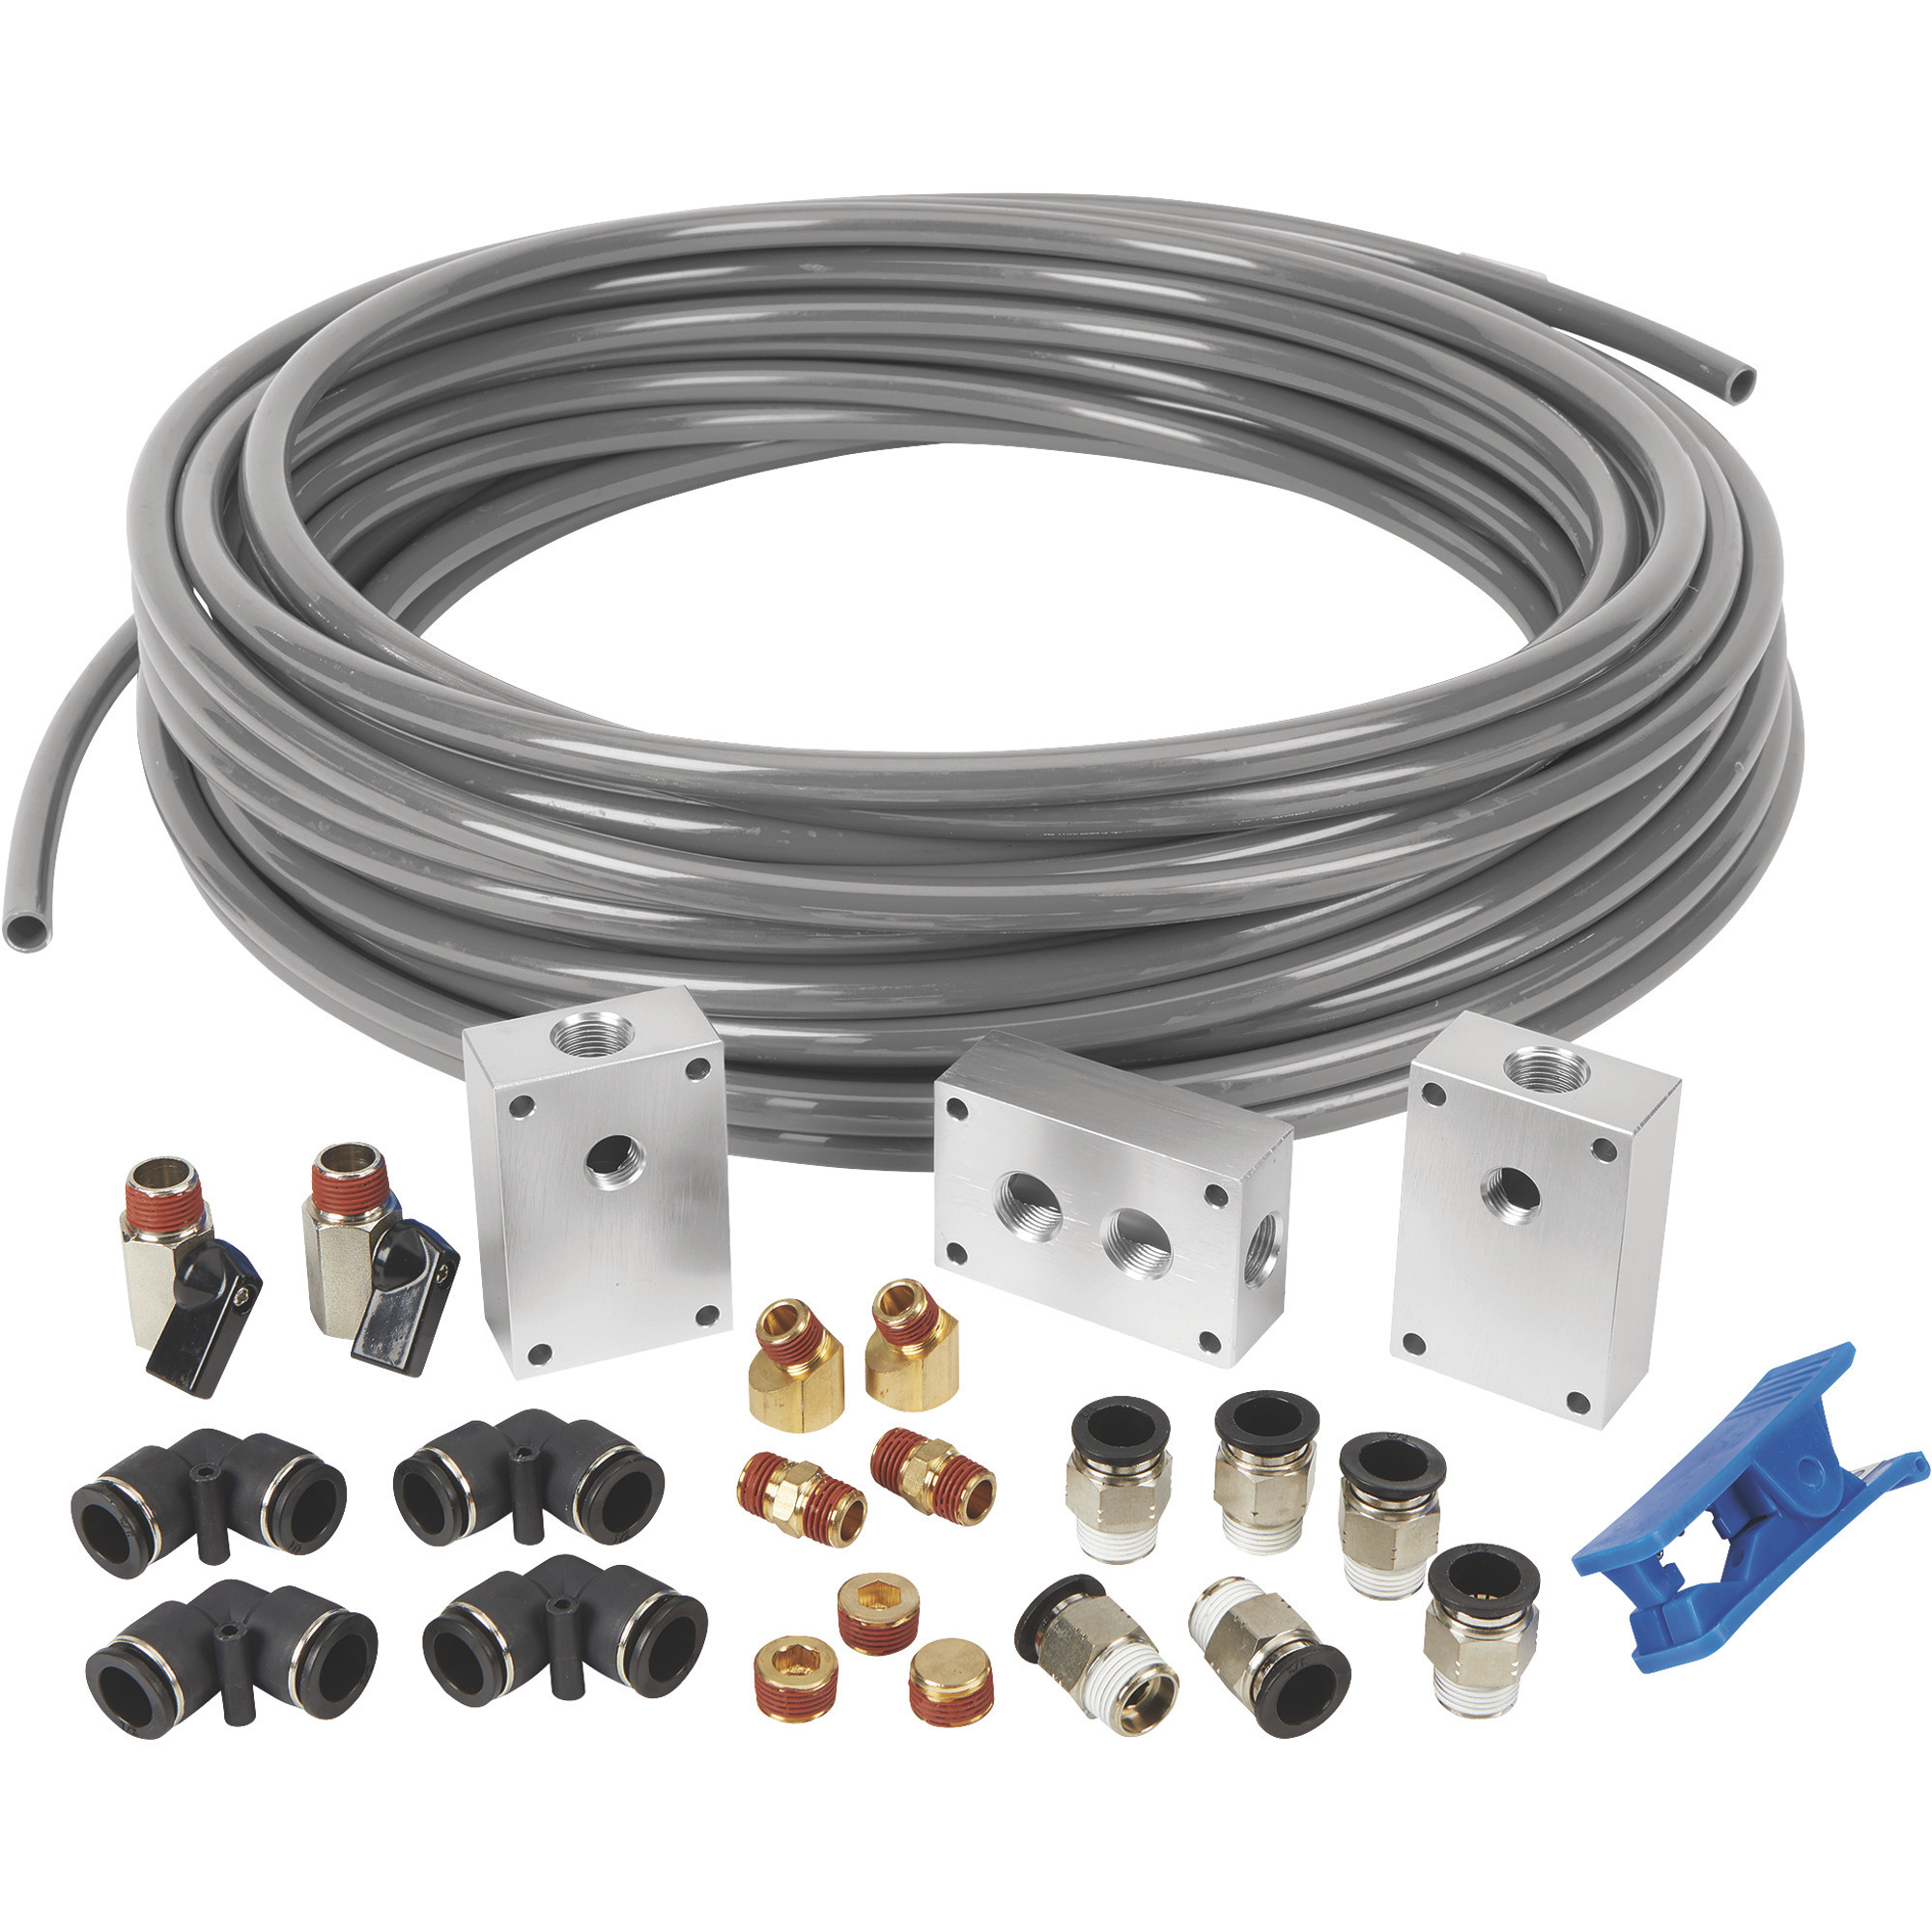 Klutch 1/2Inch, 100ft. Master Kit Compressed Air Piping System